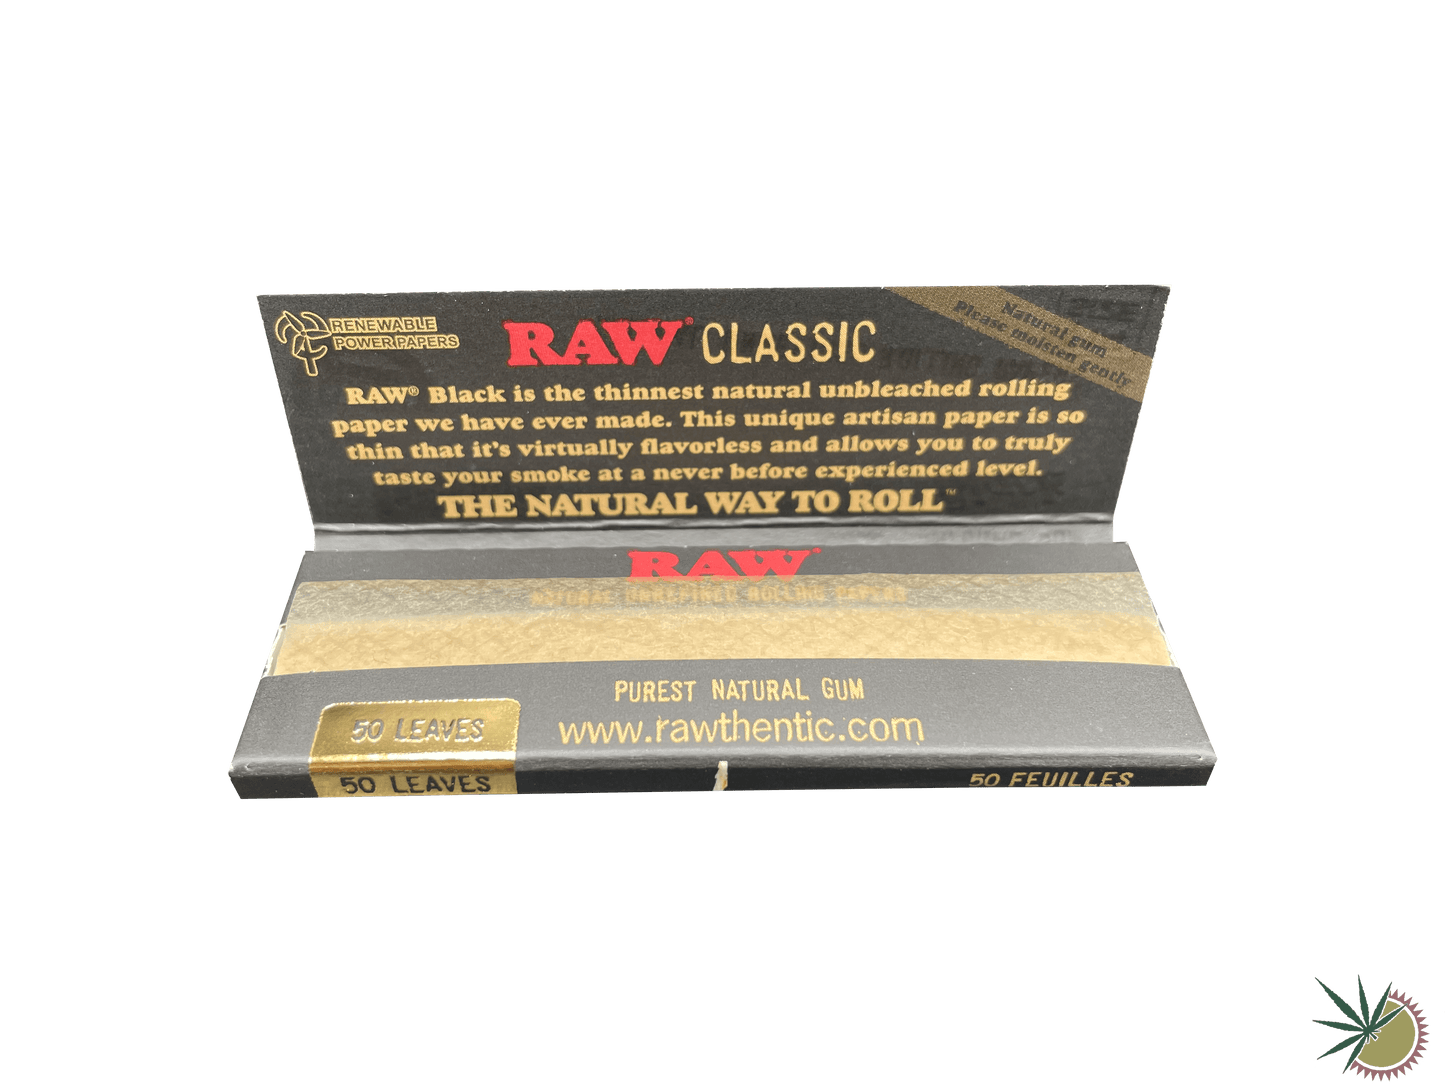 1 1/4 Papers Queen Size Slim RAW Black - THC Headshop